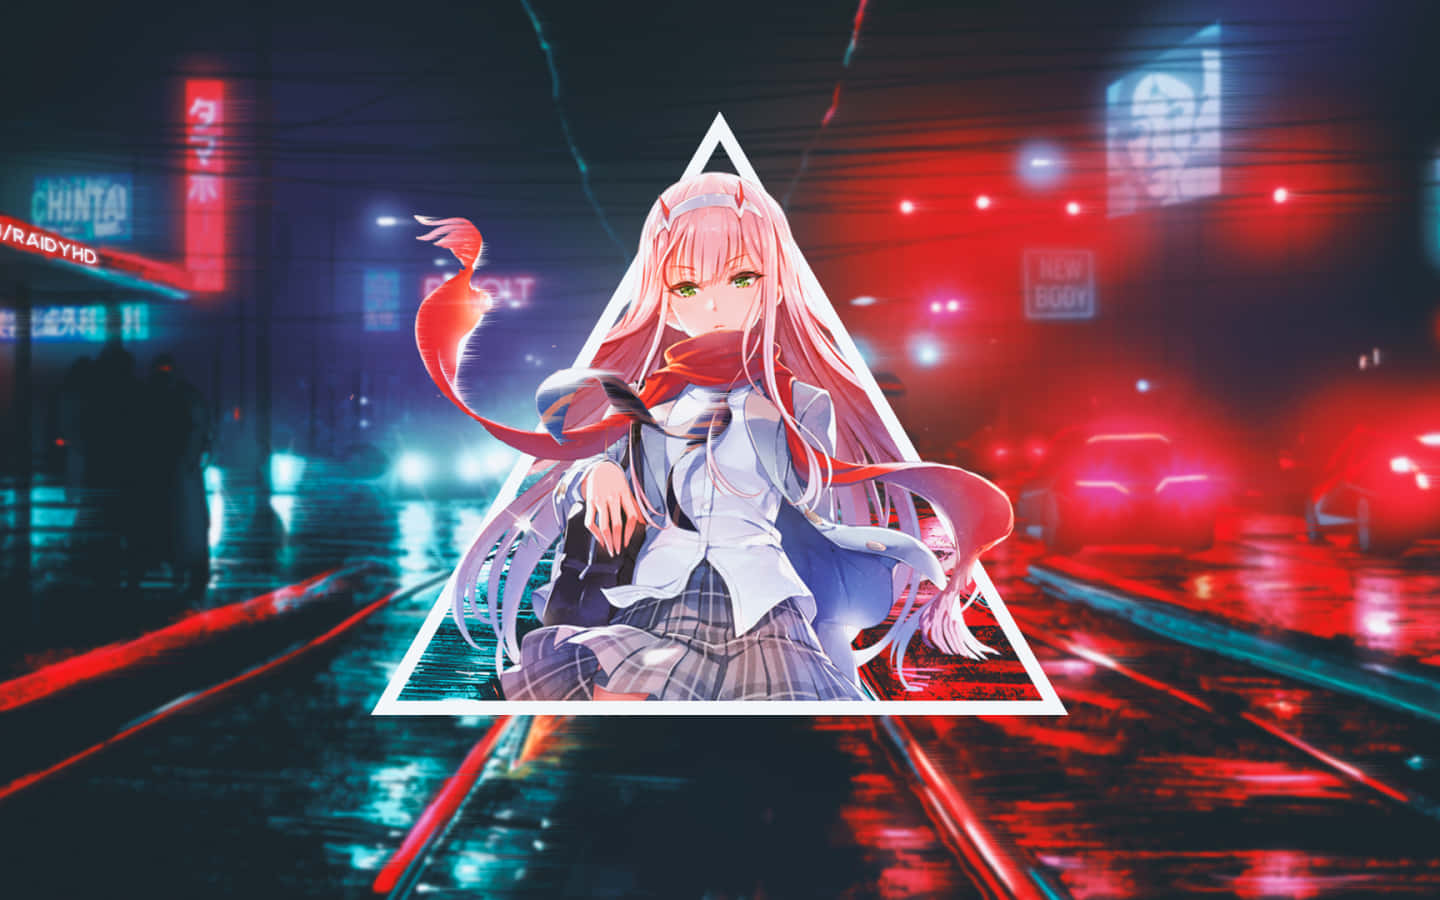 “Strelizia and Hiro, living for their dreams in the post-apocalyptic world of Darling In The Franxx.”